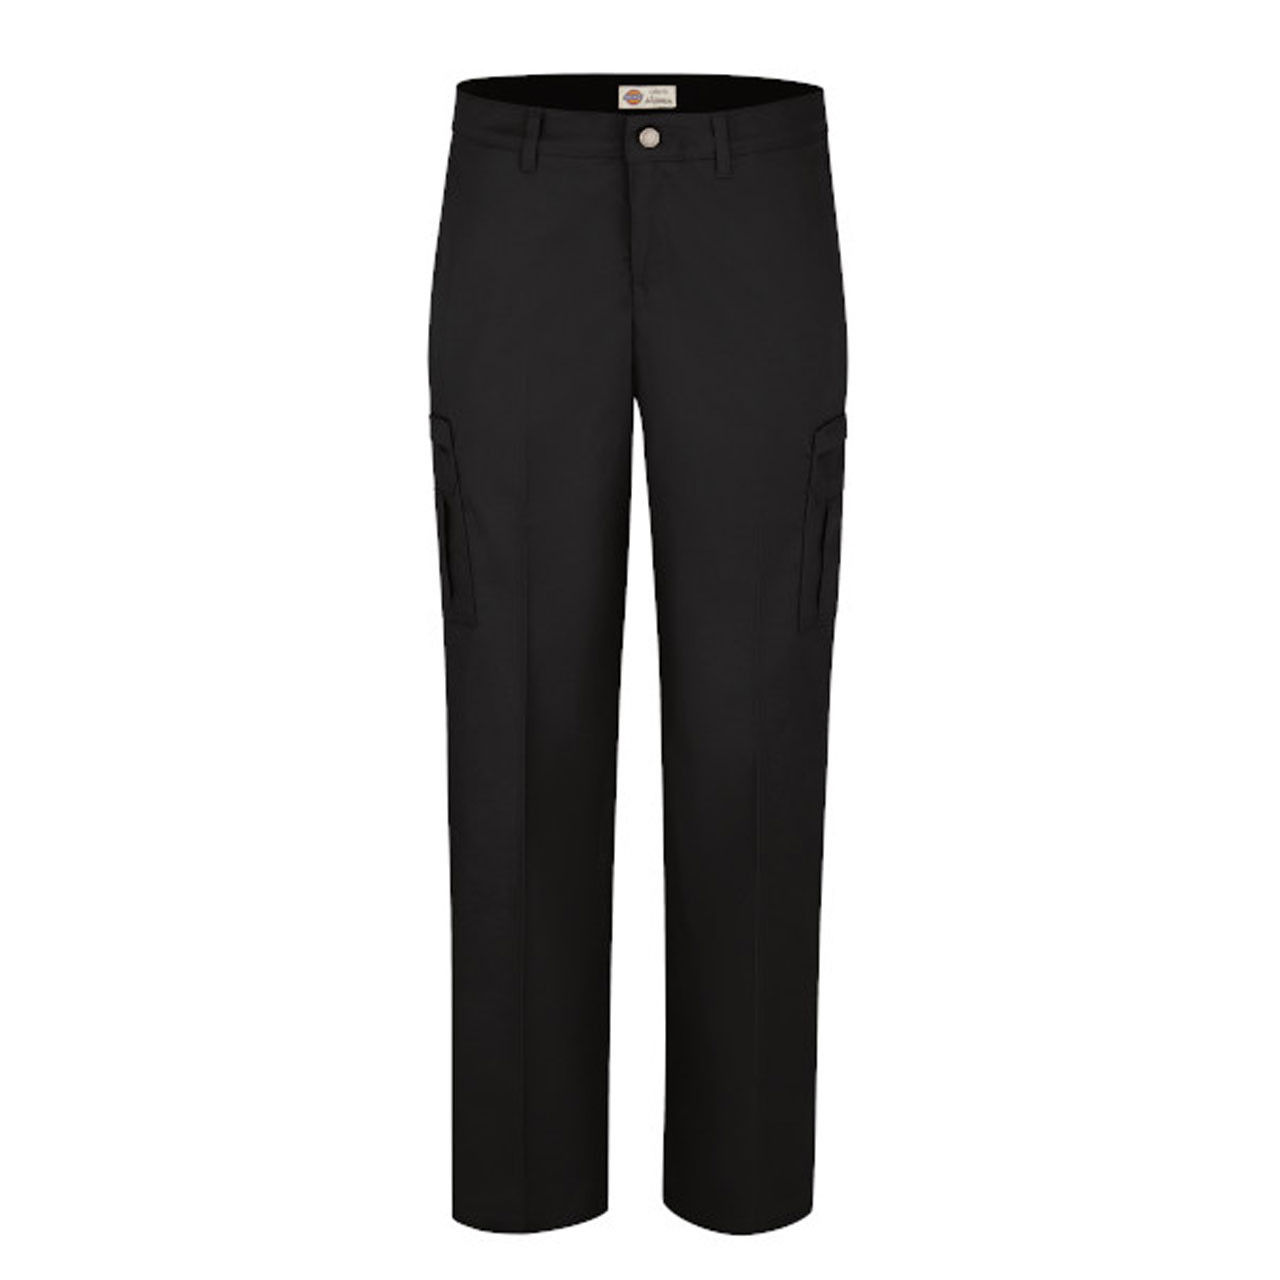 Does the dickies women's pants size chart list Premium Cargo Pants as industrial wash safe?